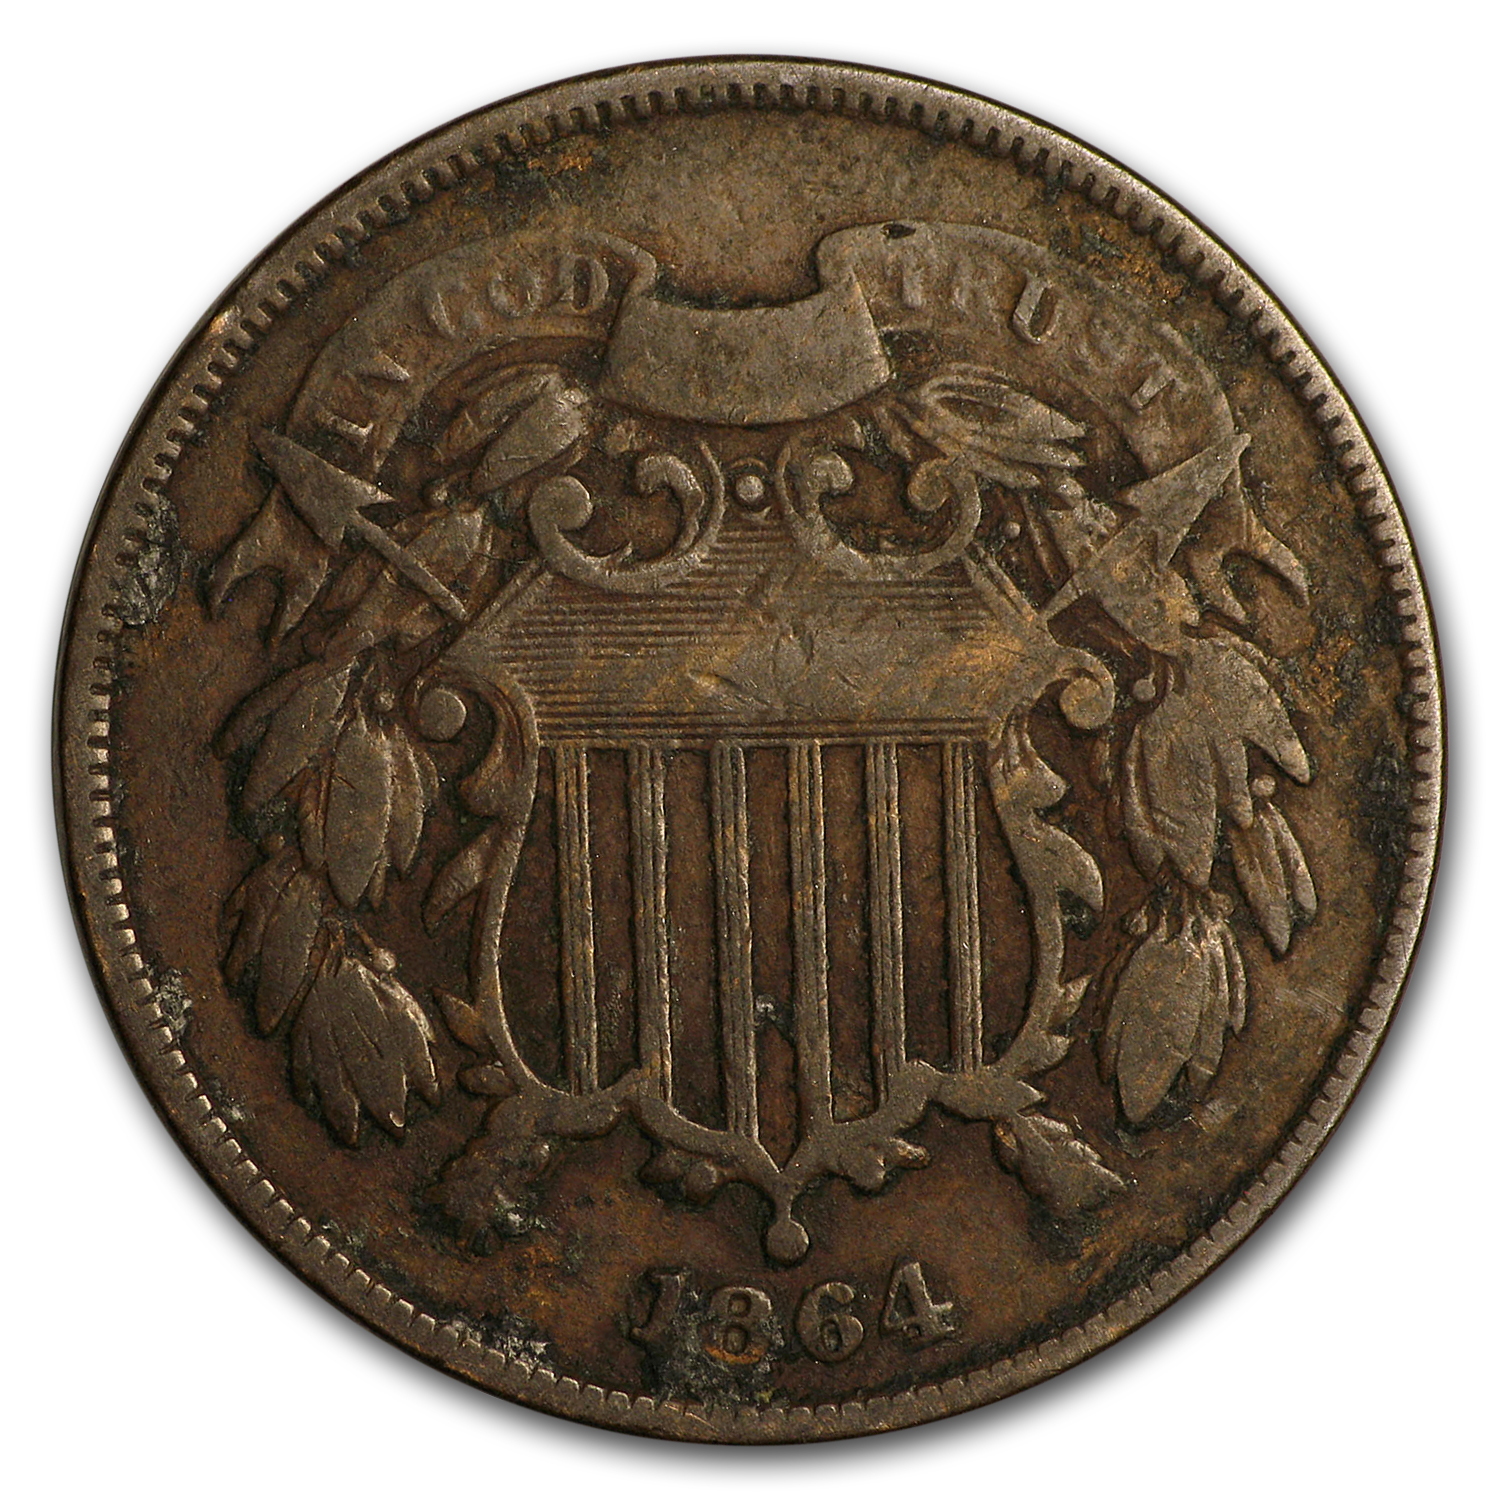 Buy 1864 Two Cent Piece VG